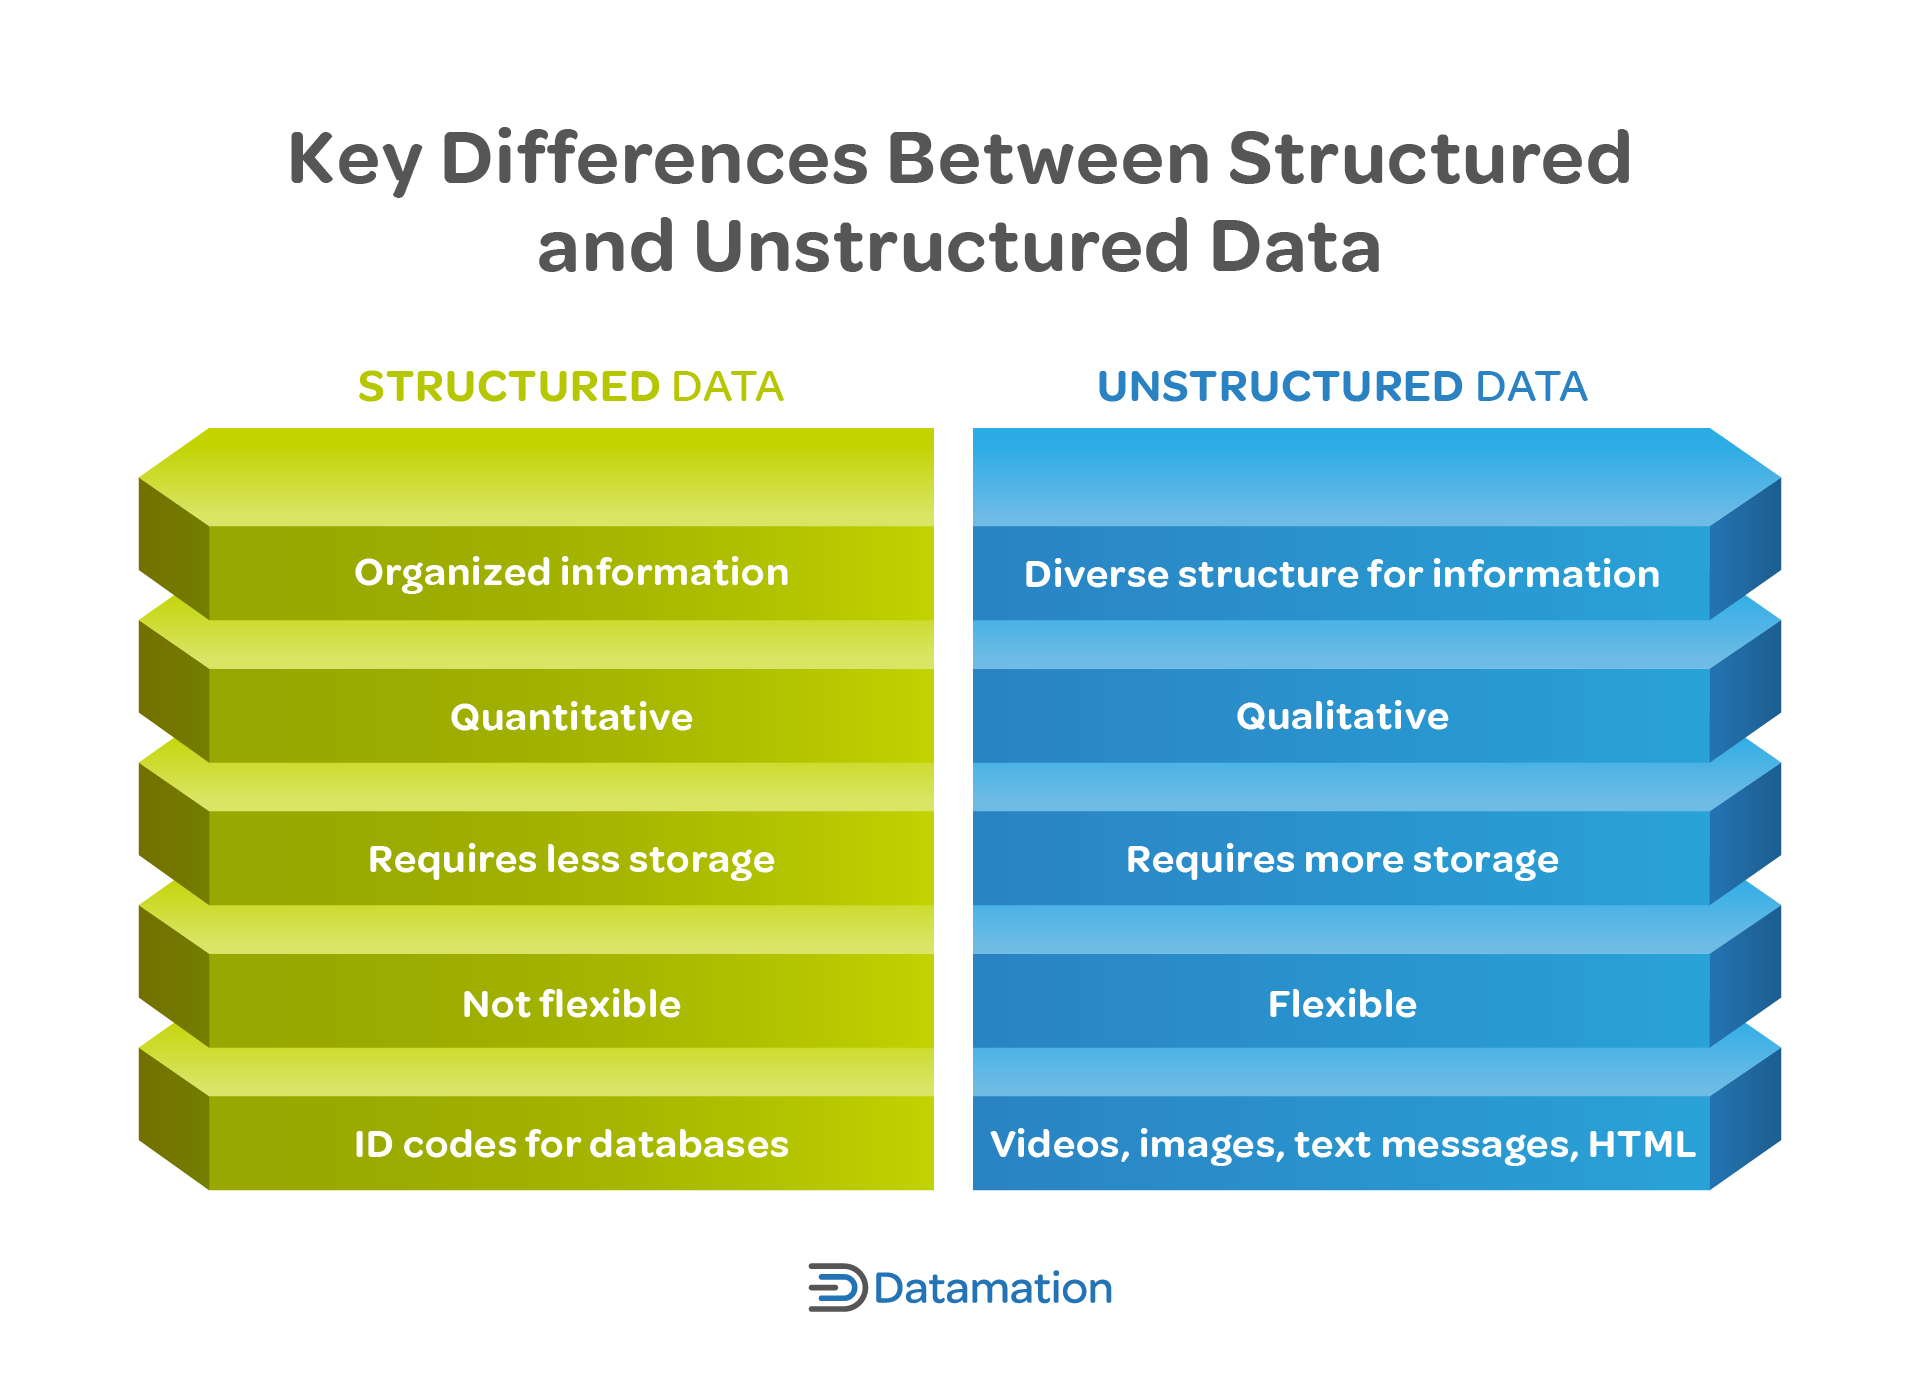 Structured vs. Unstructured data